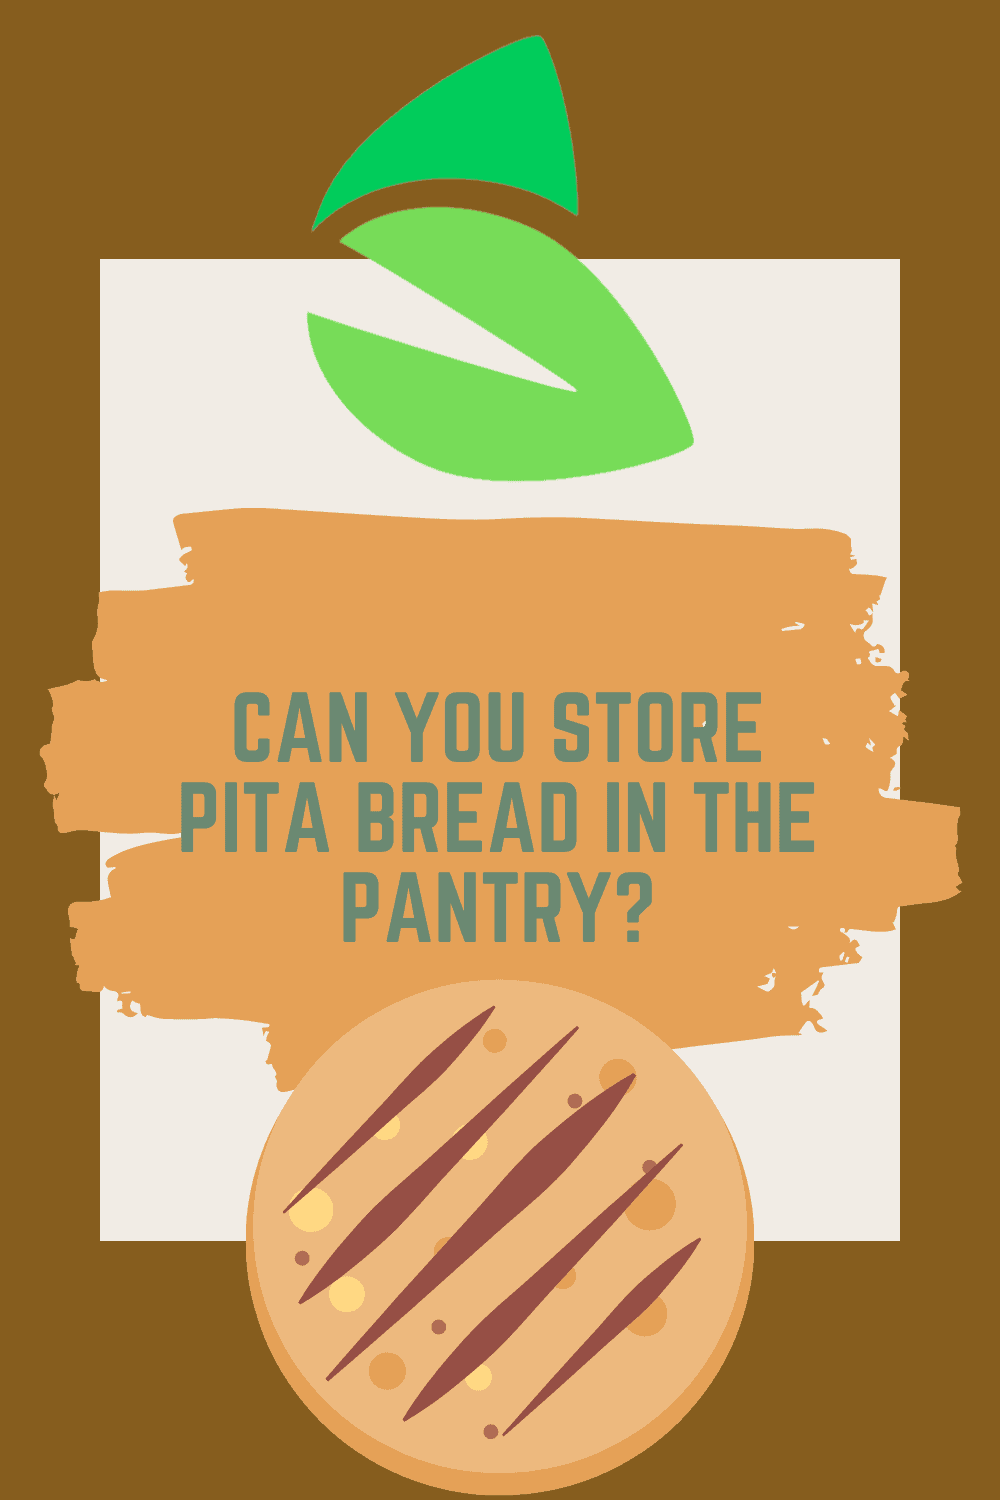 Can You Store Pita Bread in the Pantry